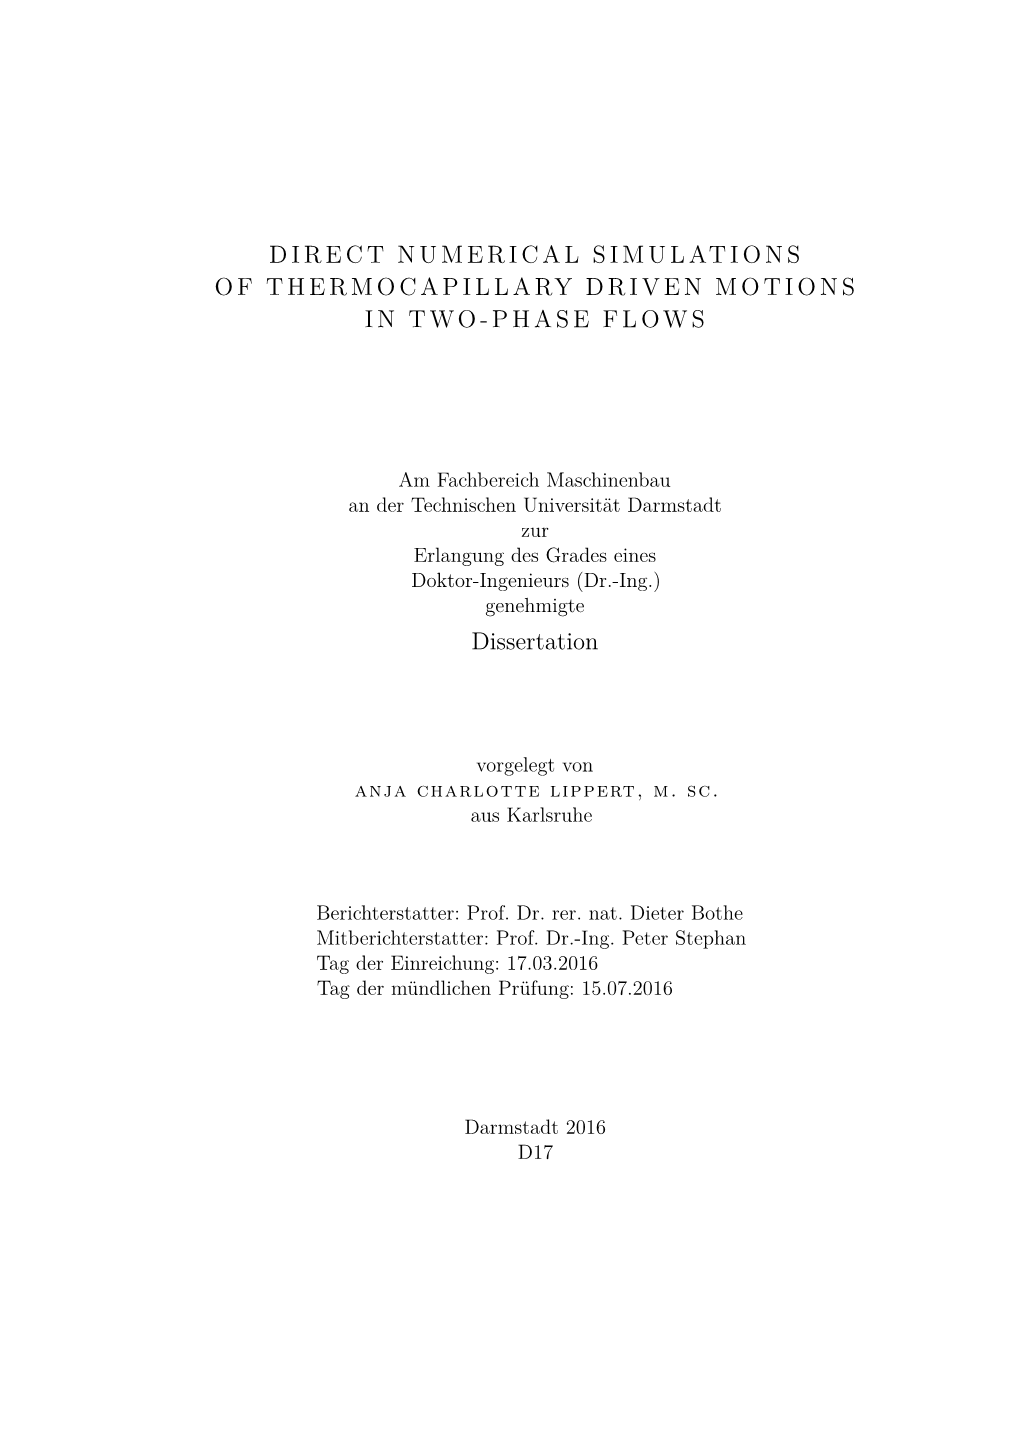 Direct Numerical Simulations of Thermocapillary Driven Motions in Two-Phase Flows, Darmstadt, November 27, 2016 ABSTRACT